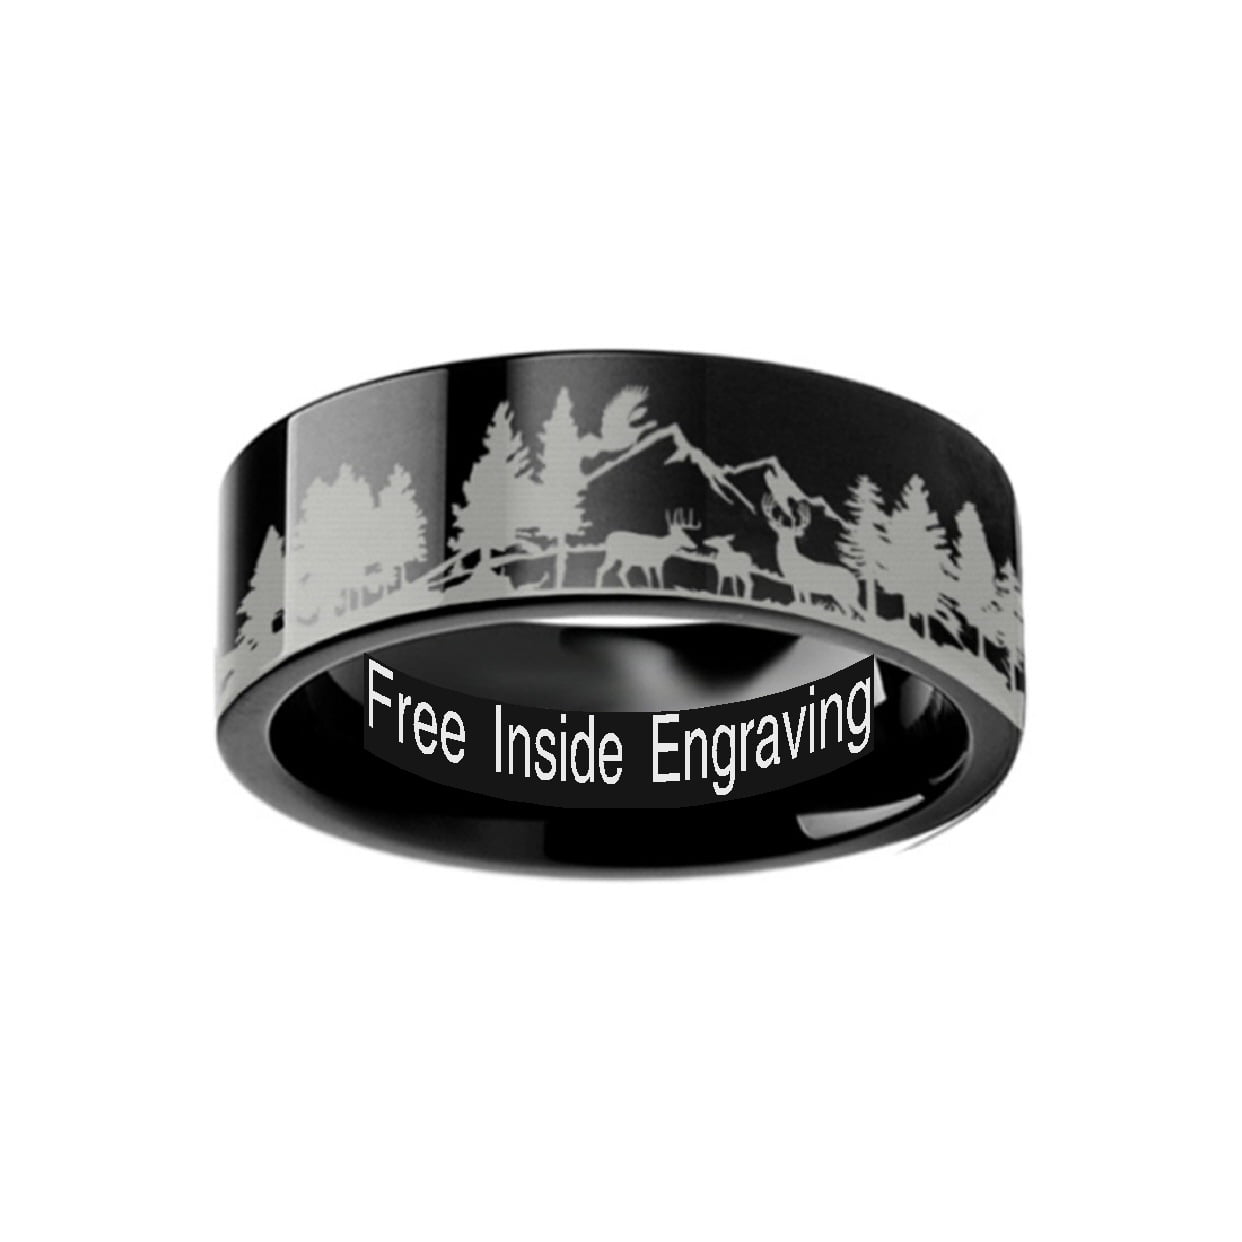 Thorsten Animal Nature Landscape Reindeer Deer Stag Mountain Range Ring Black Tungsten Ring 12mm Wide Wedding Band from Roy Rose Jewelry